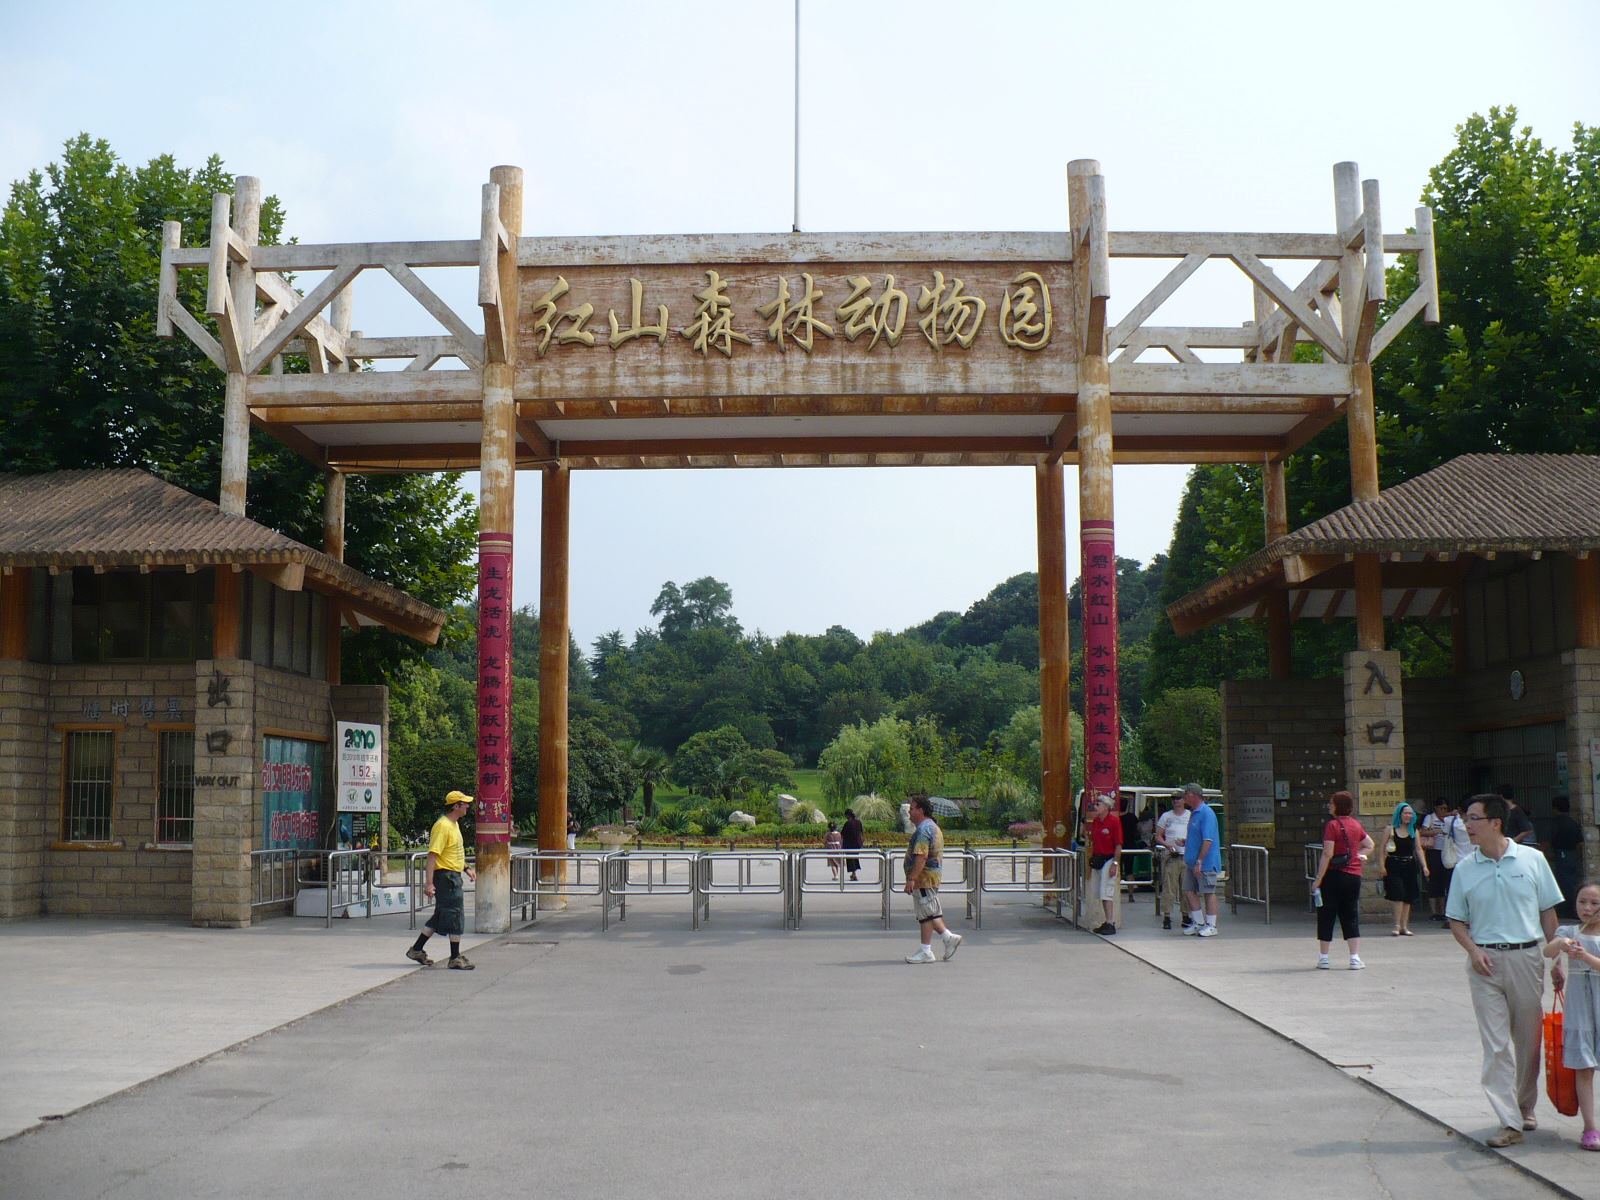 14-intriguing-facts-about-hongshan-forest-zoo